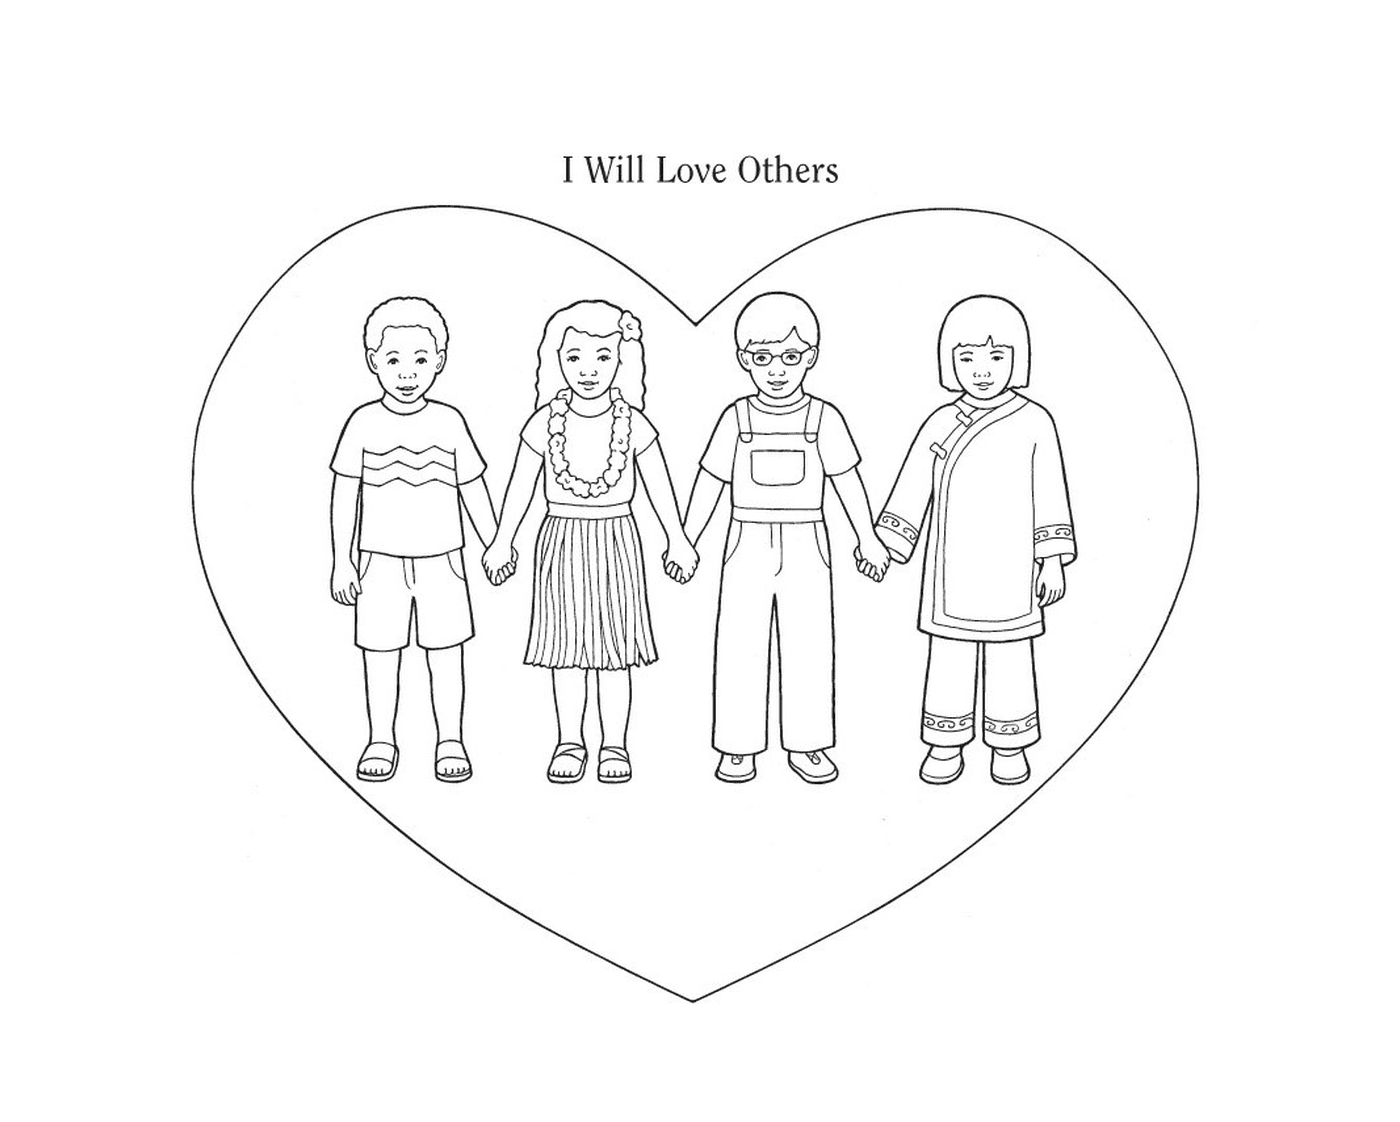  Four children holding hands in front of a heart 